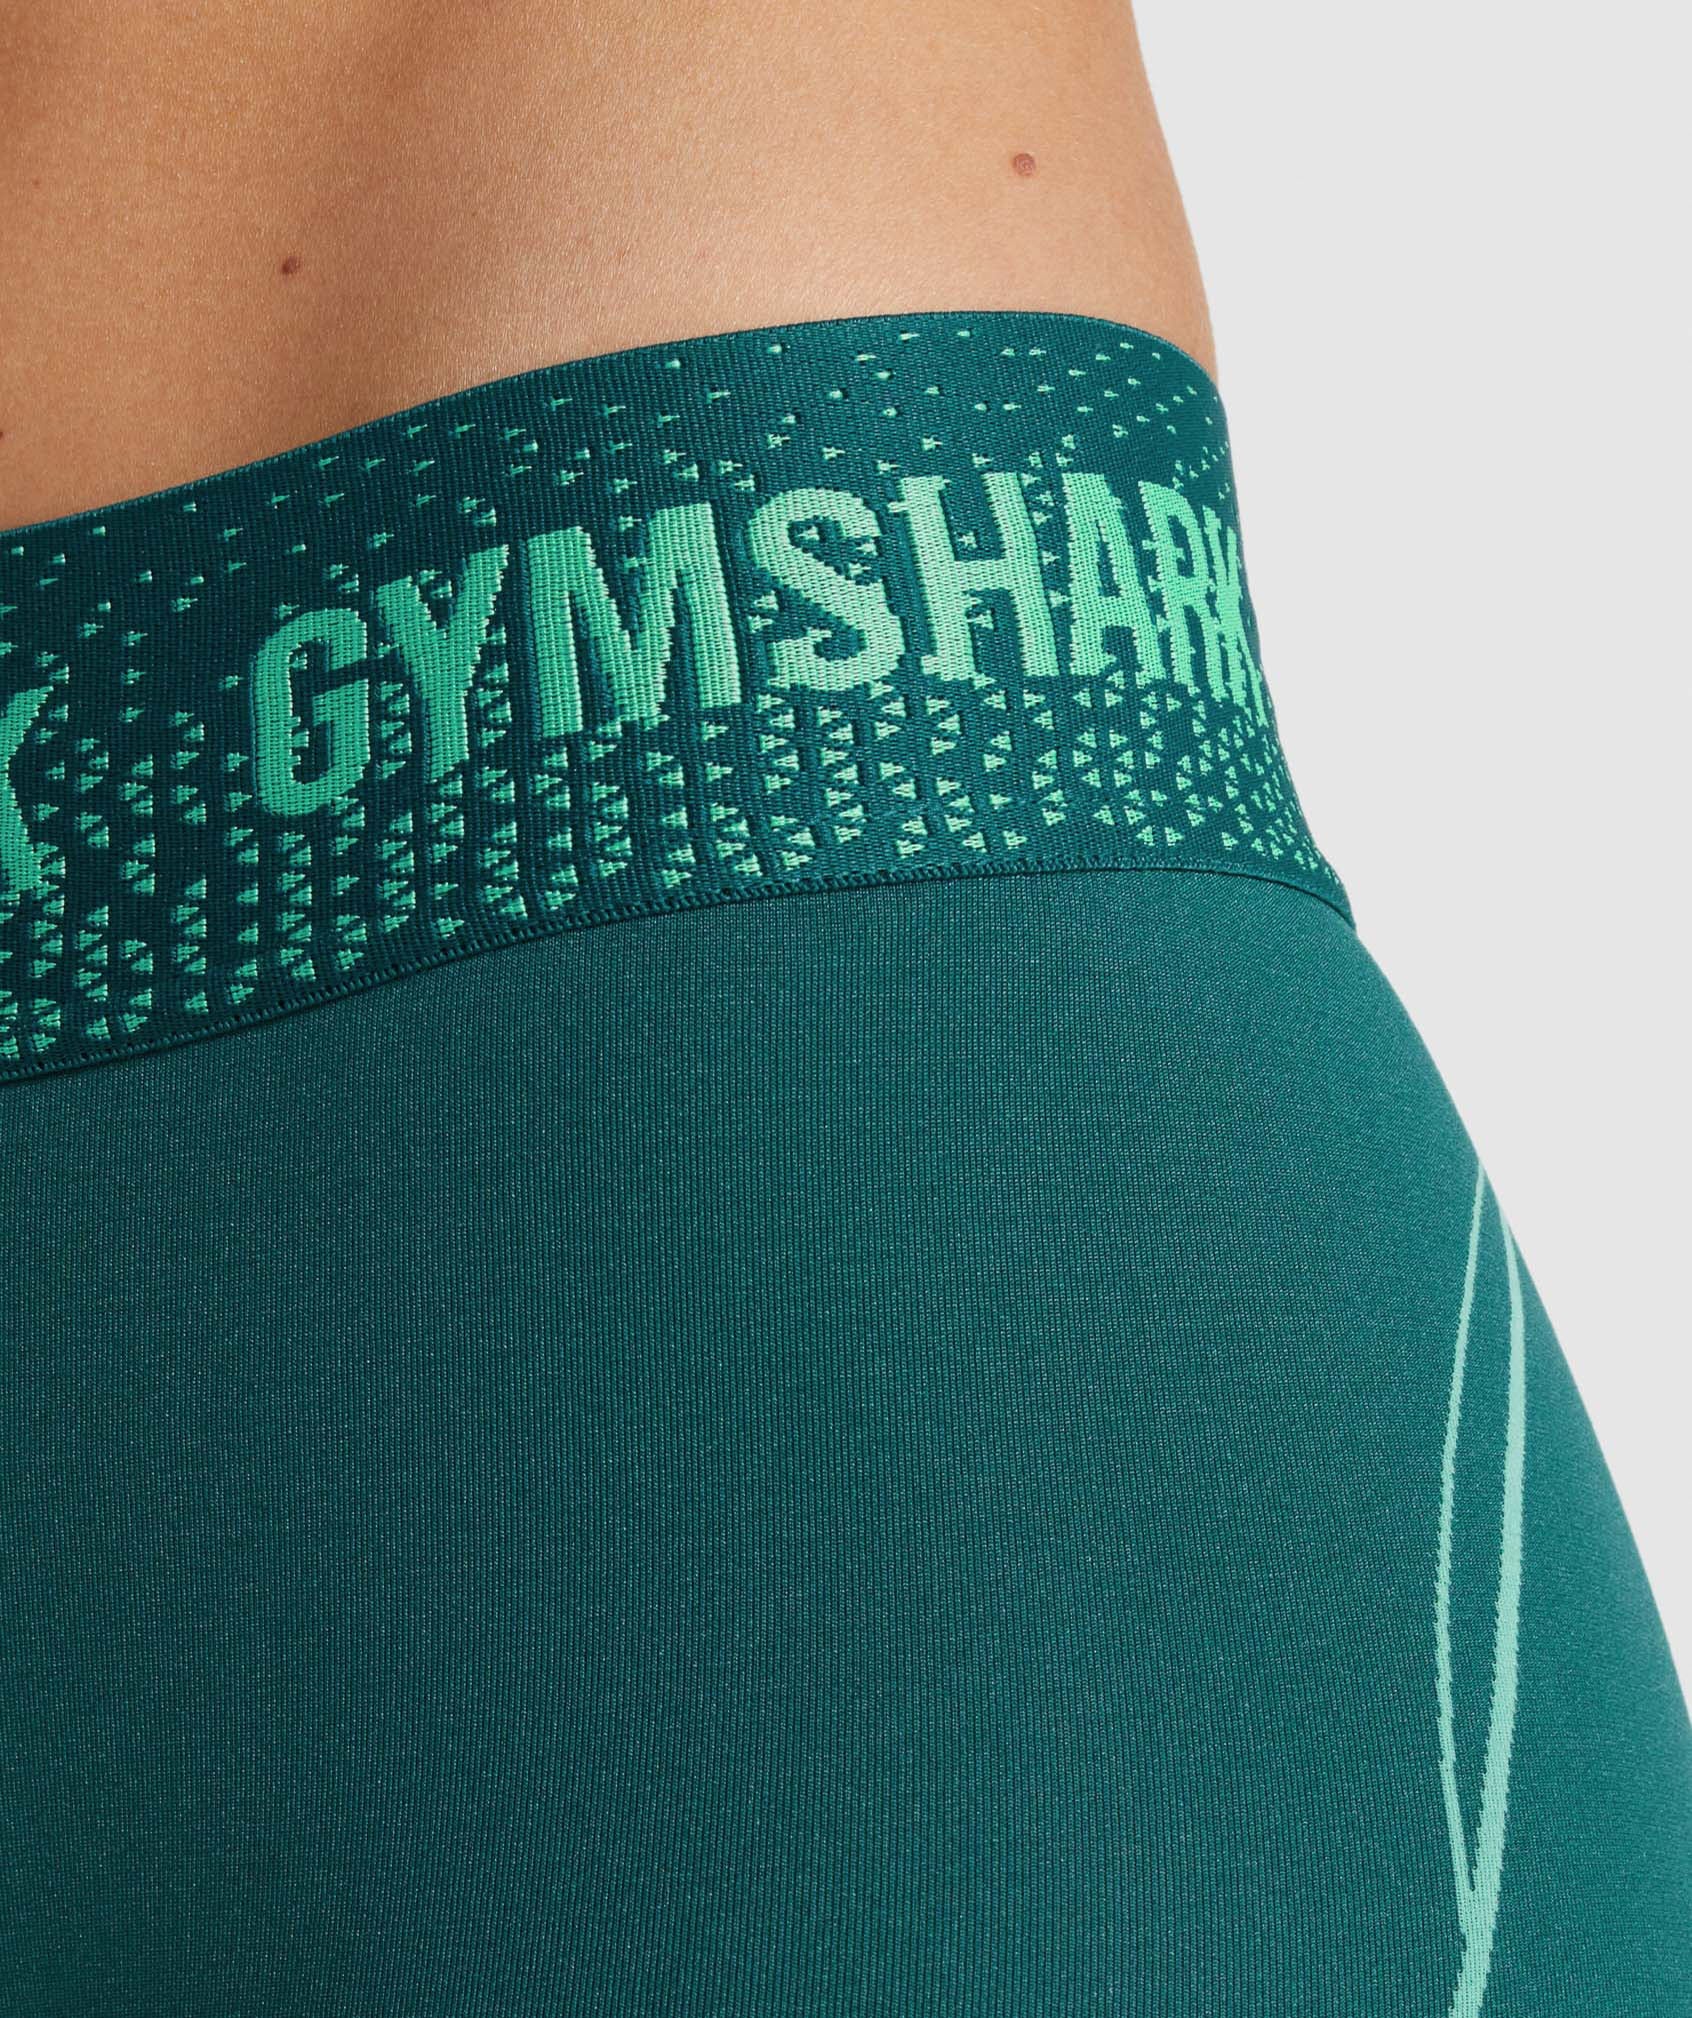 Apex Seamless Low Rise Shorts in Teal - view 6